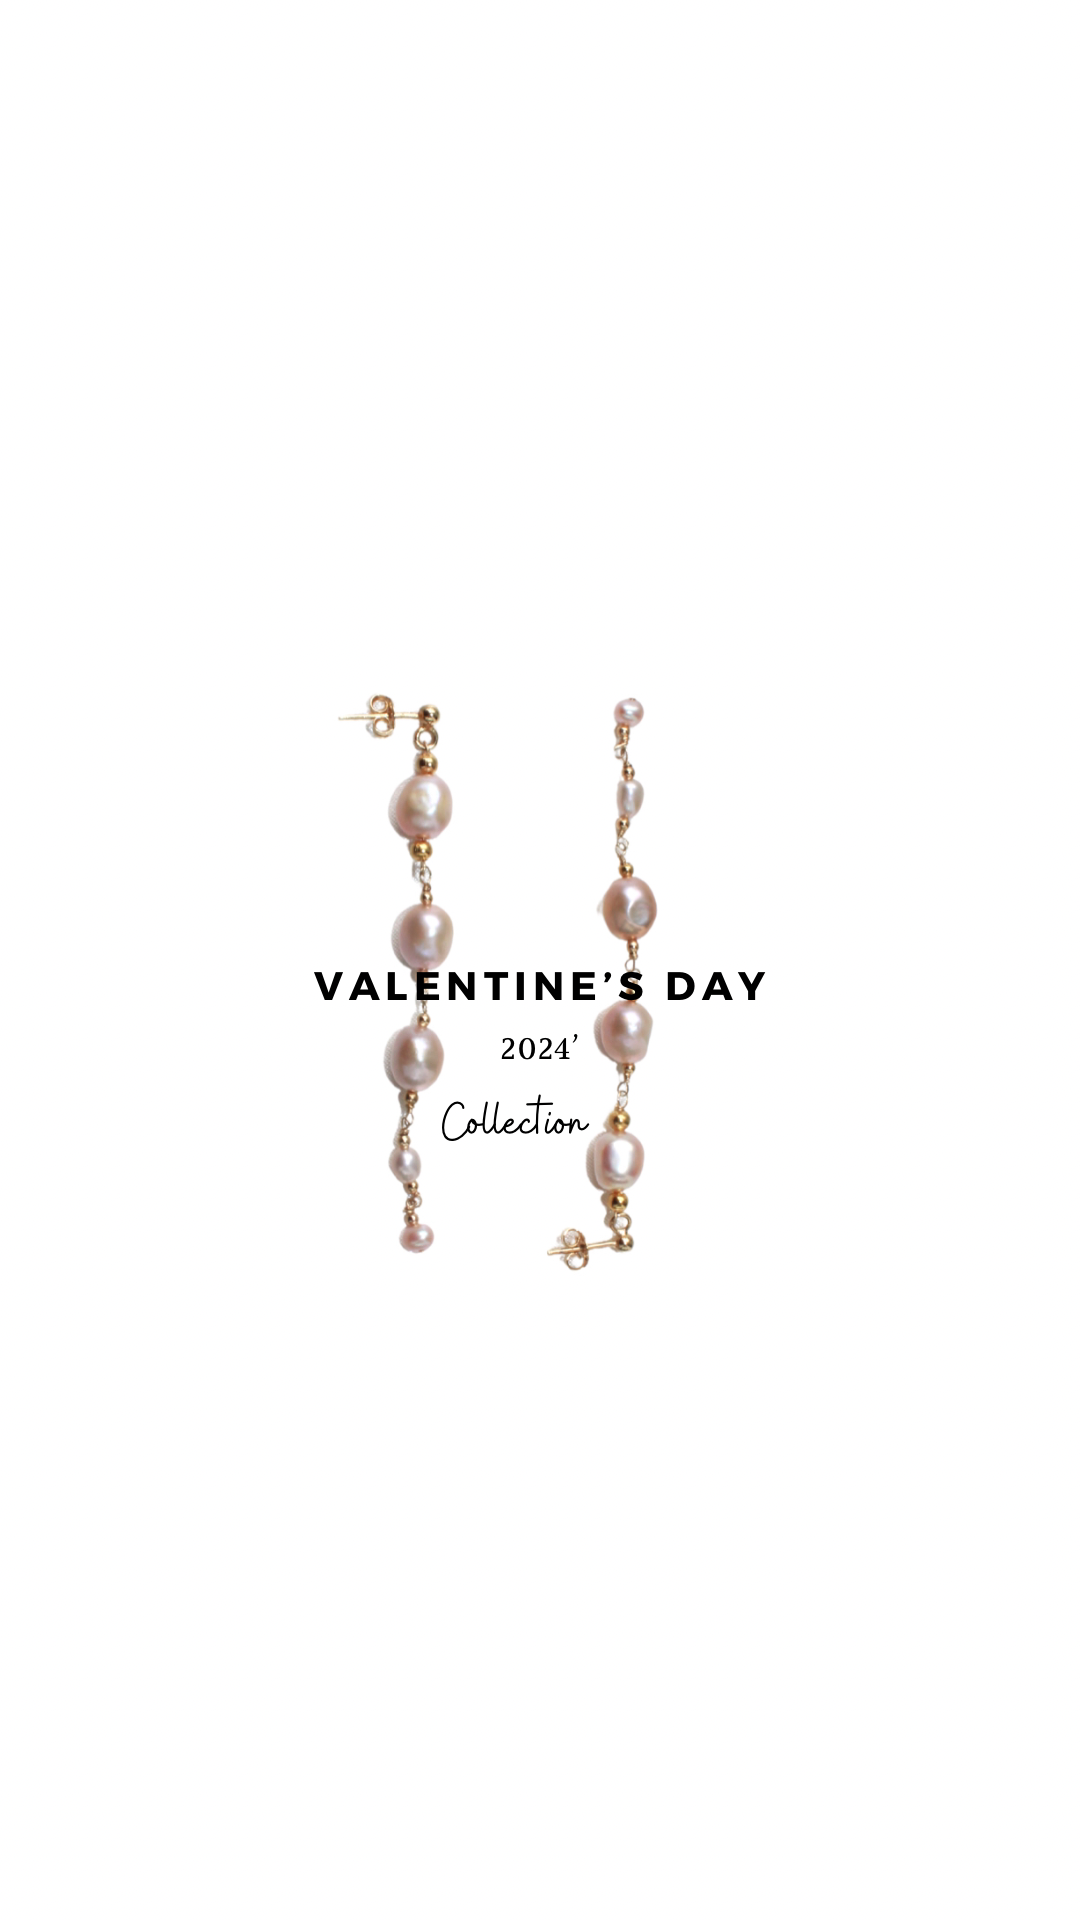 The Valentine’s Day earrings